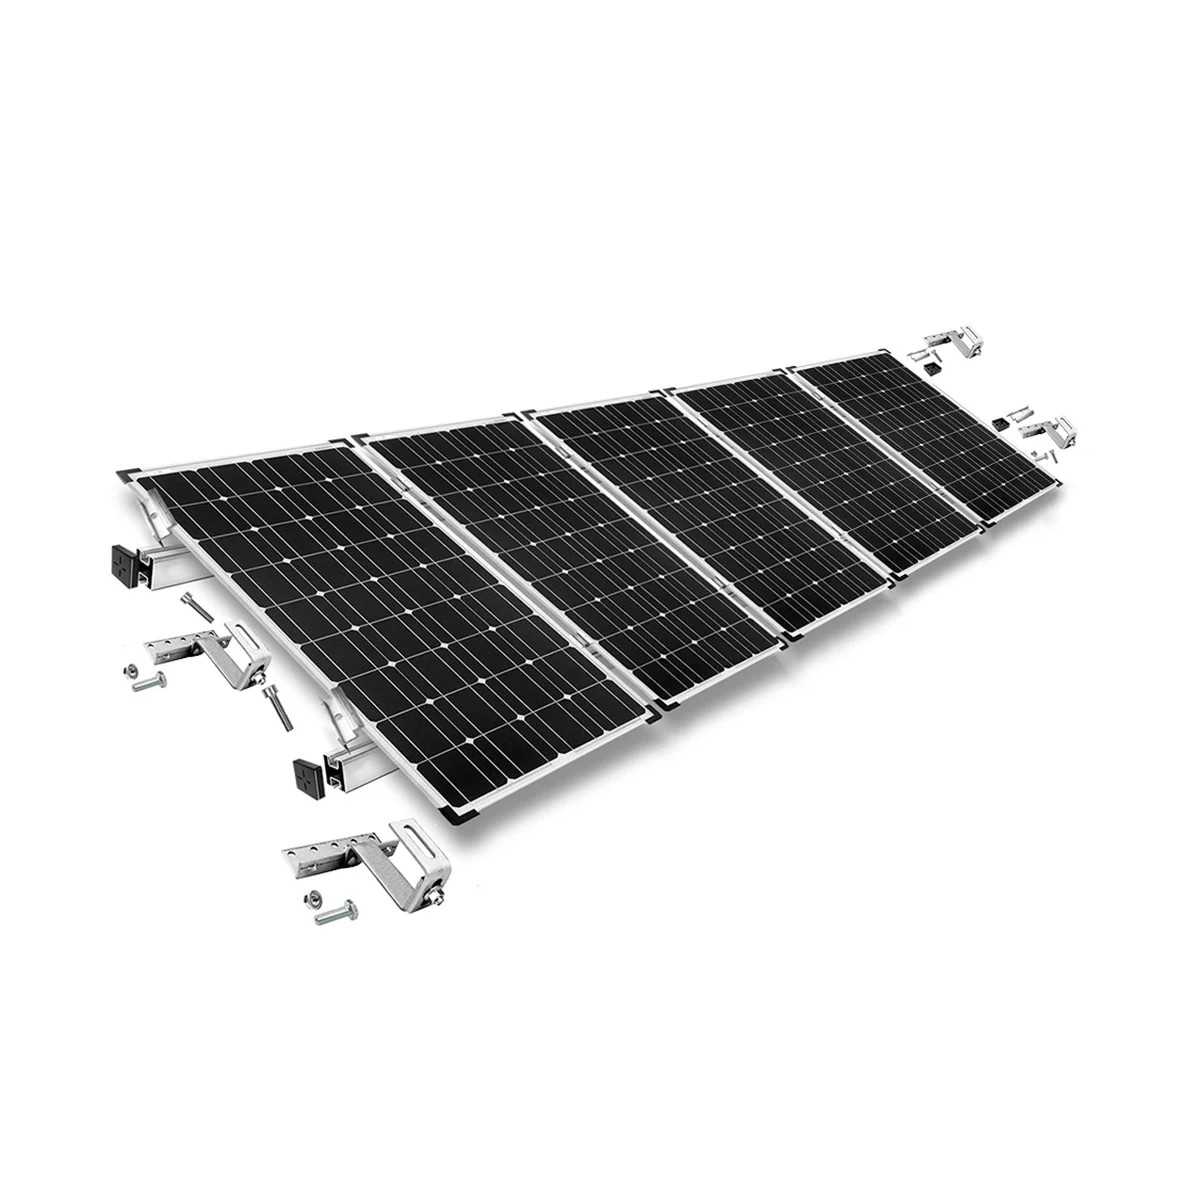 Mounting kit h30 adjustable with roof brackets (for tiles) for sloping roof 5 solar panels frame 30 mm